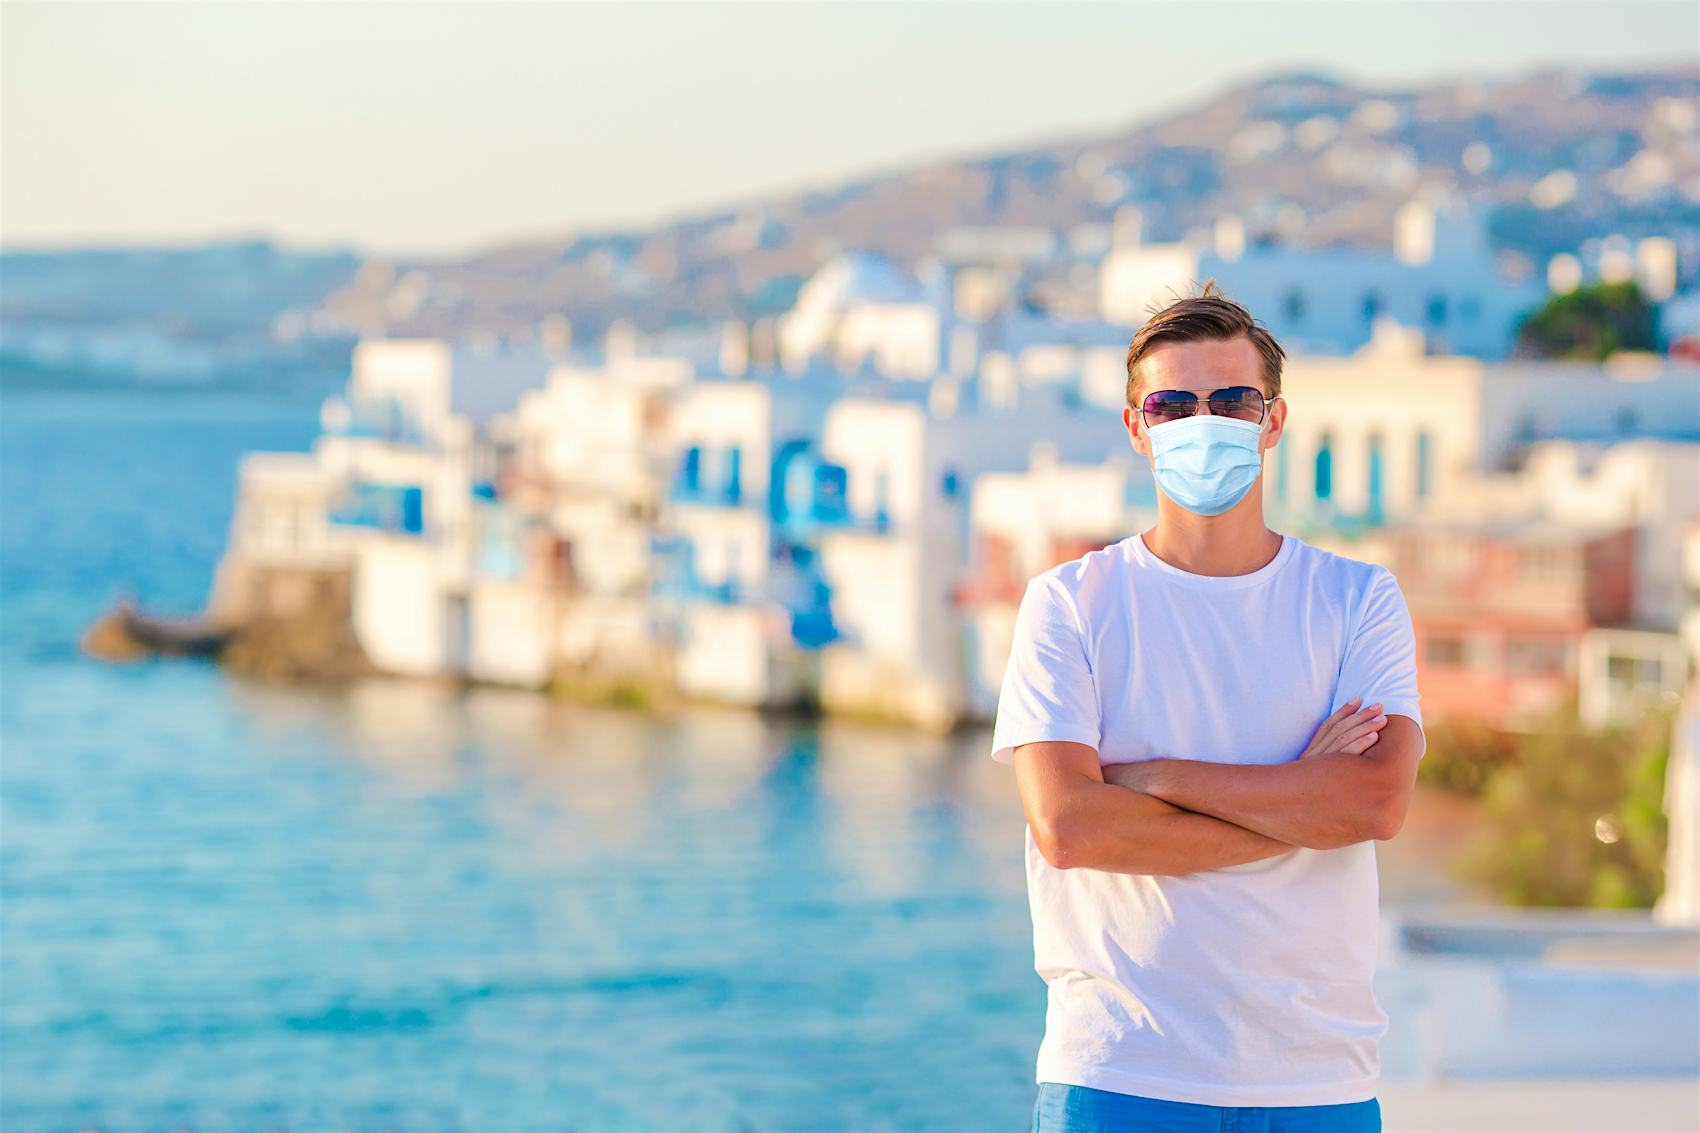 Masked person posing for image with coastal destination in the background